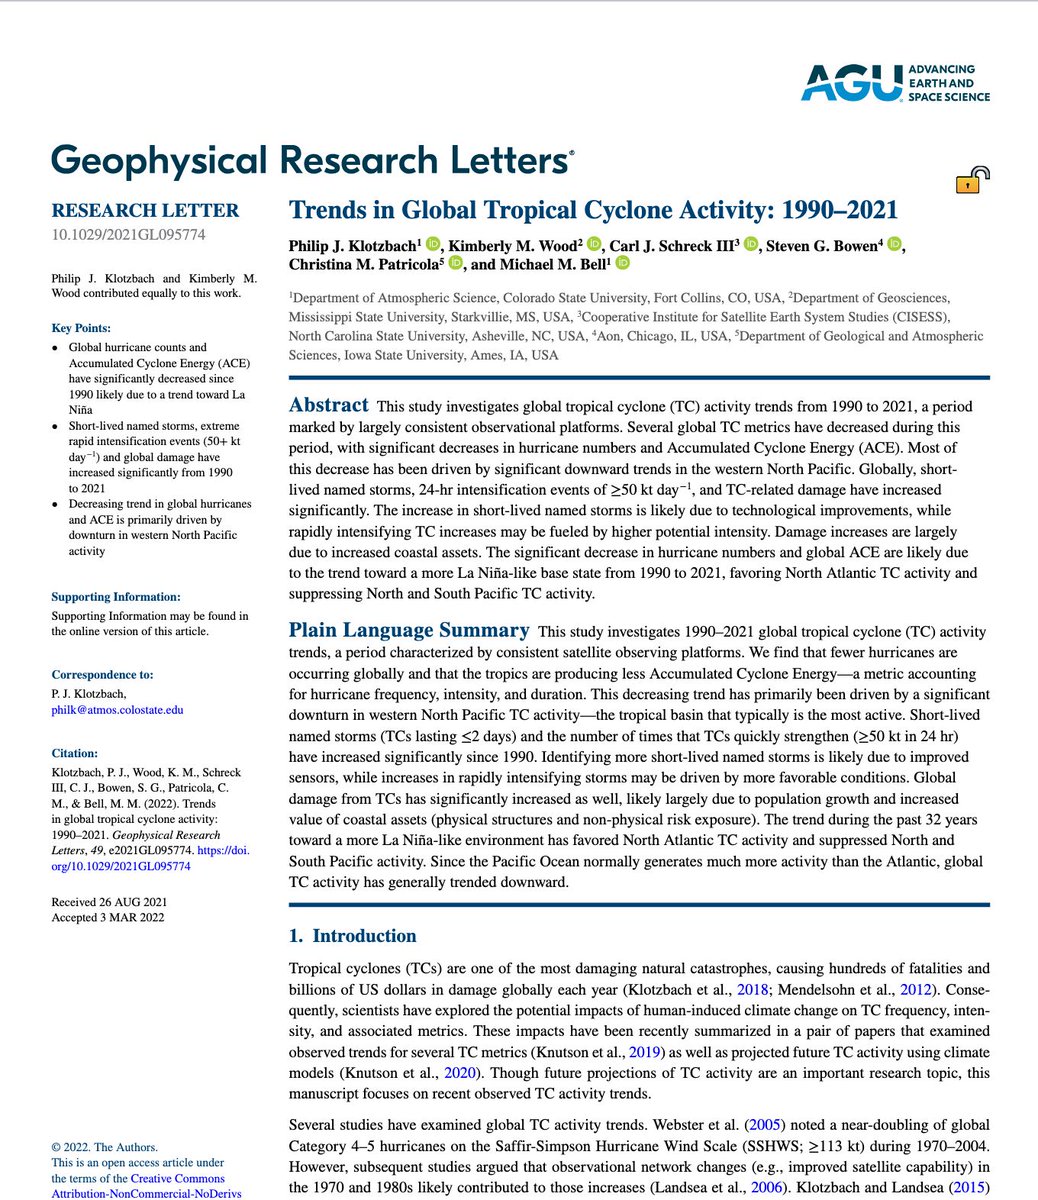 Congratulations to @carl_schreck and his coauthors: their paper on 'Trends in Global Tropical Cyclone Activity: 1990–2021' was flagged as a #TopDownloadedArticle by @theAGU Geophysical Research Letters. The open access article is available at buff.ly/3VszItE